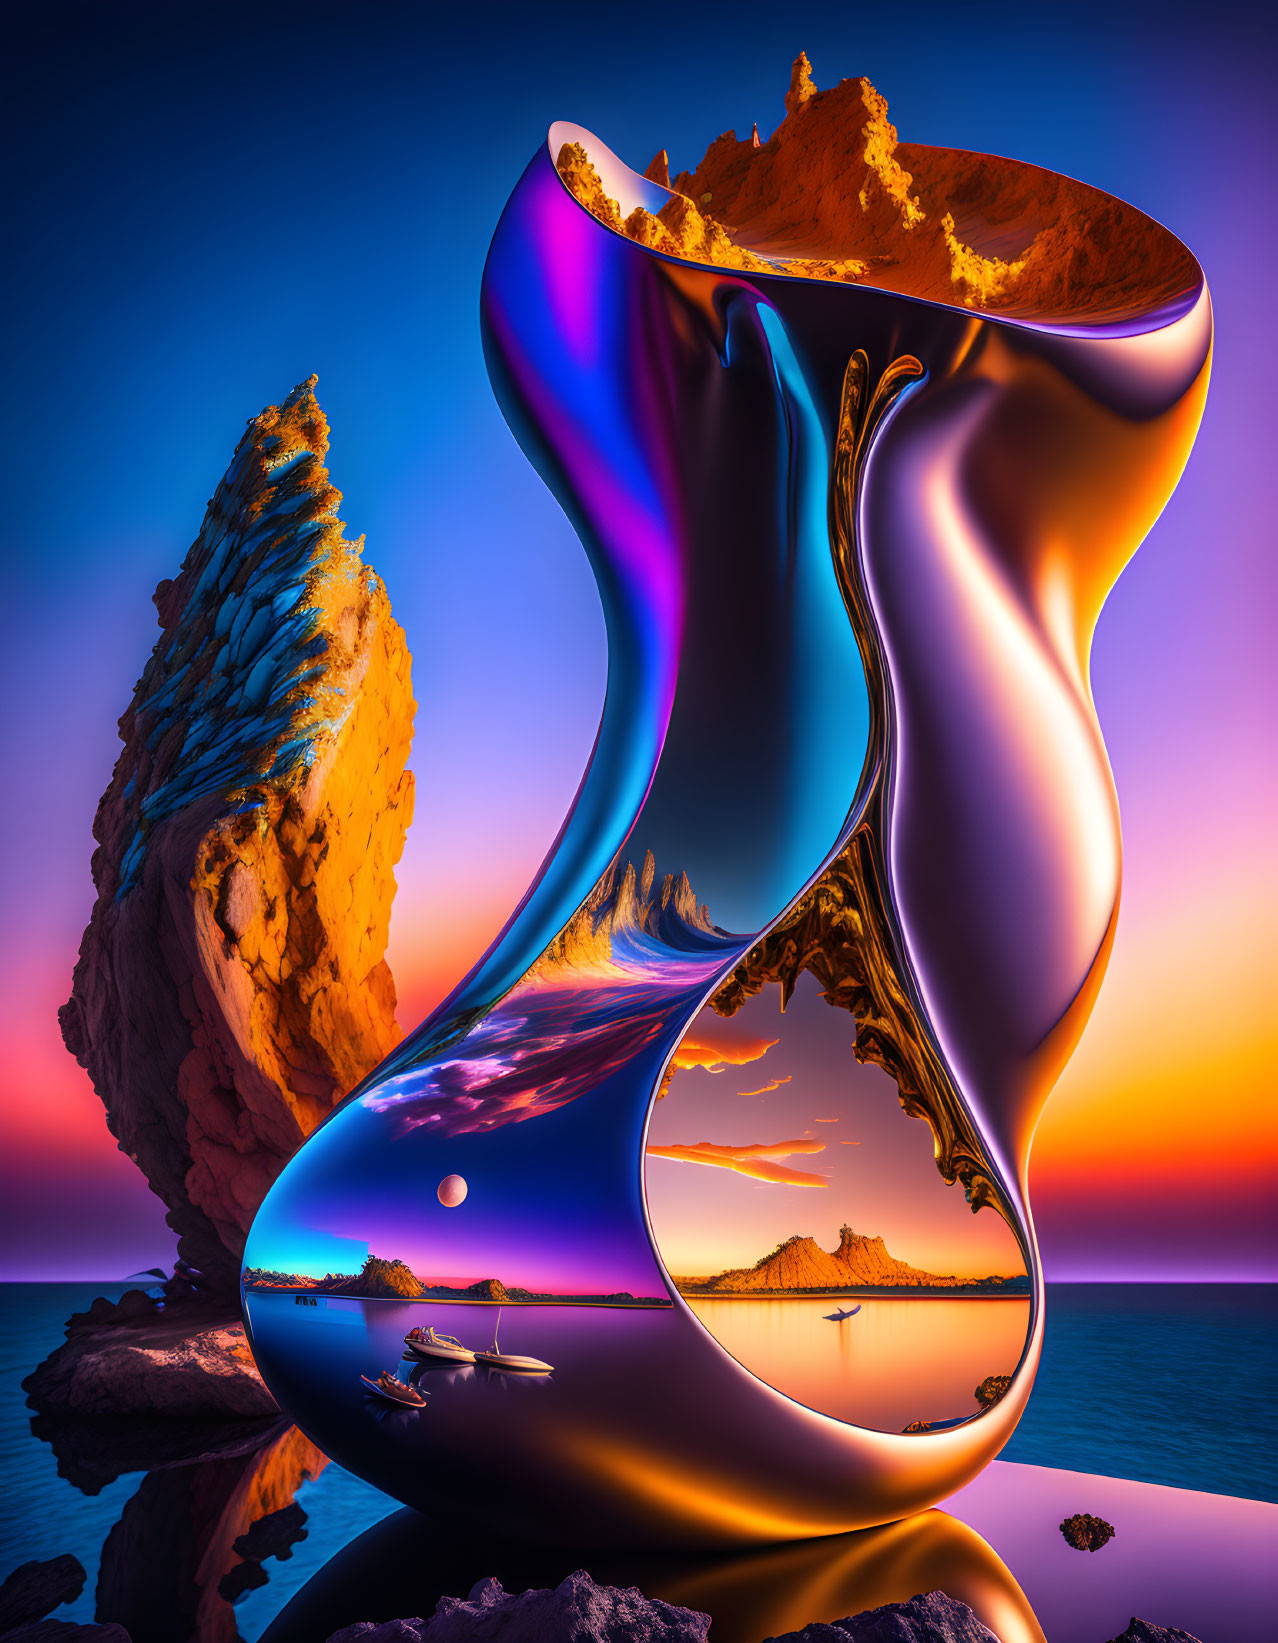 Twisted shiny object reflecting vibrant landscape with cliffs, ocean, and sunset sky